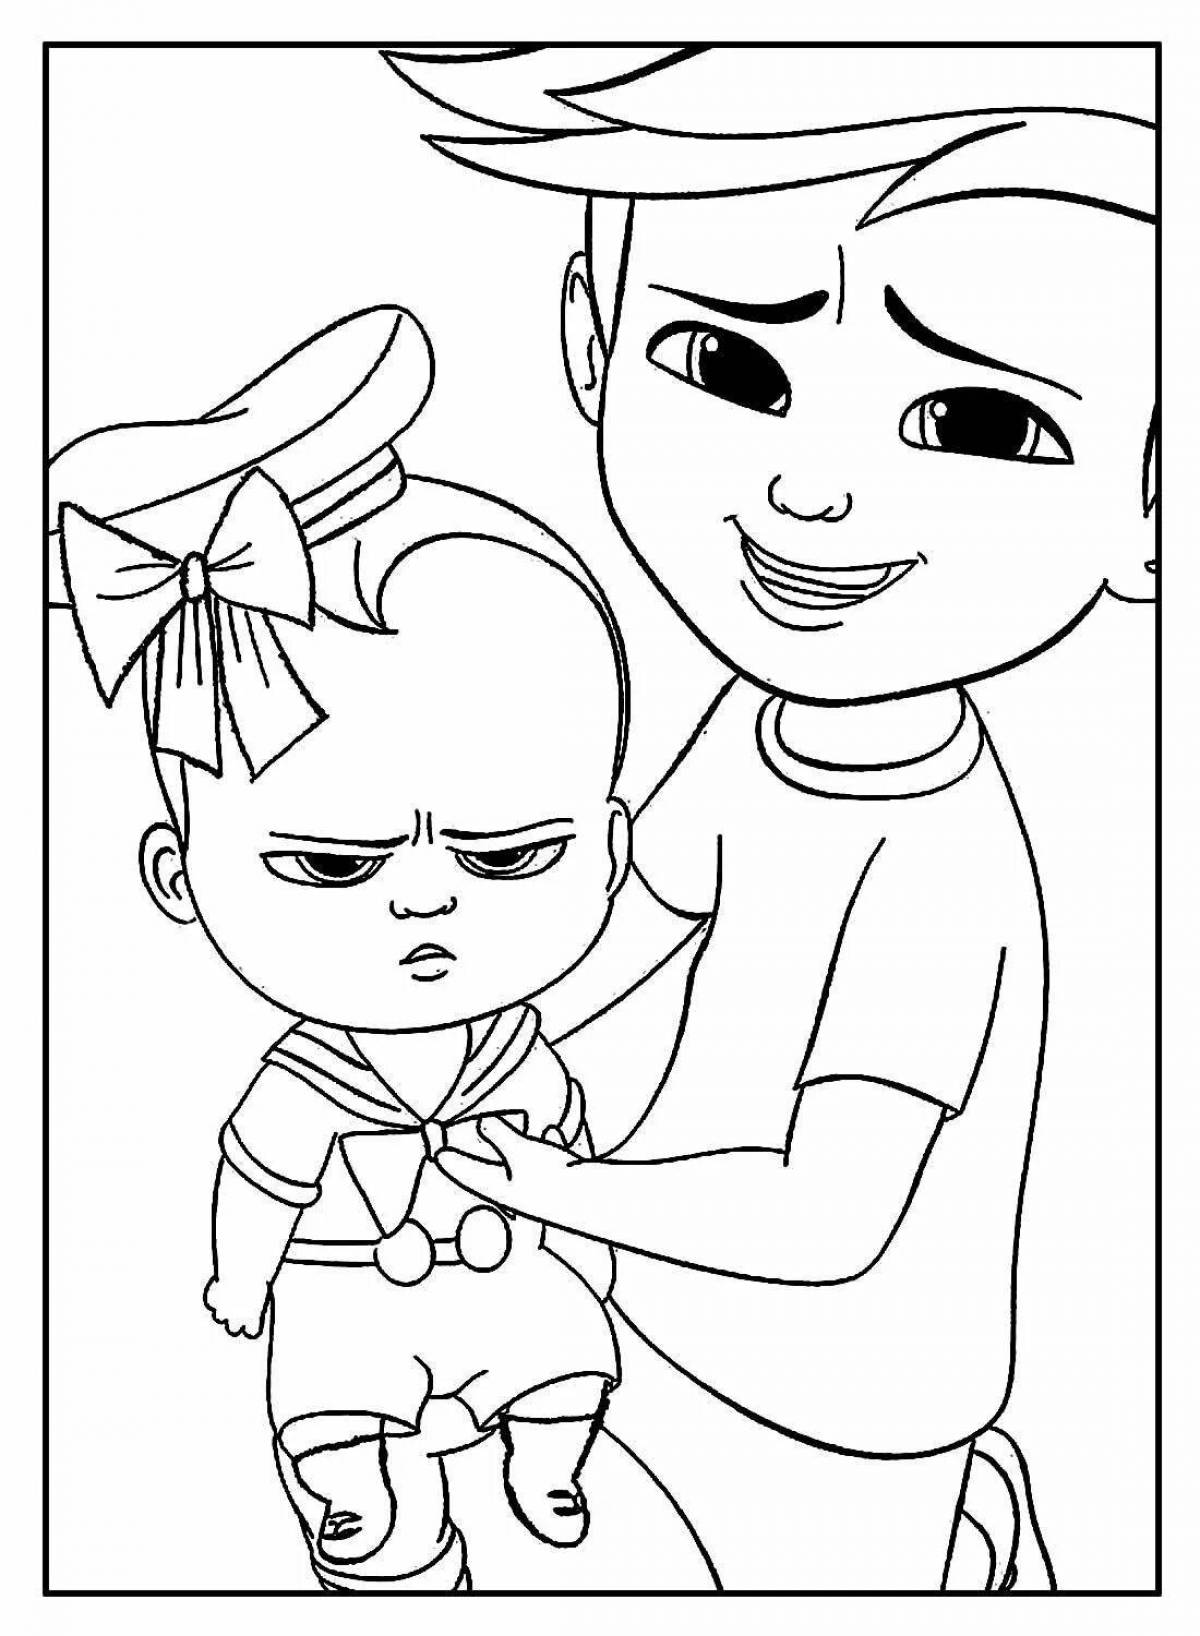 Colorful baby boss coloring page